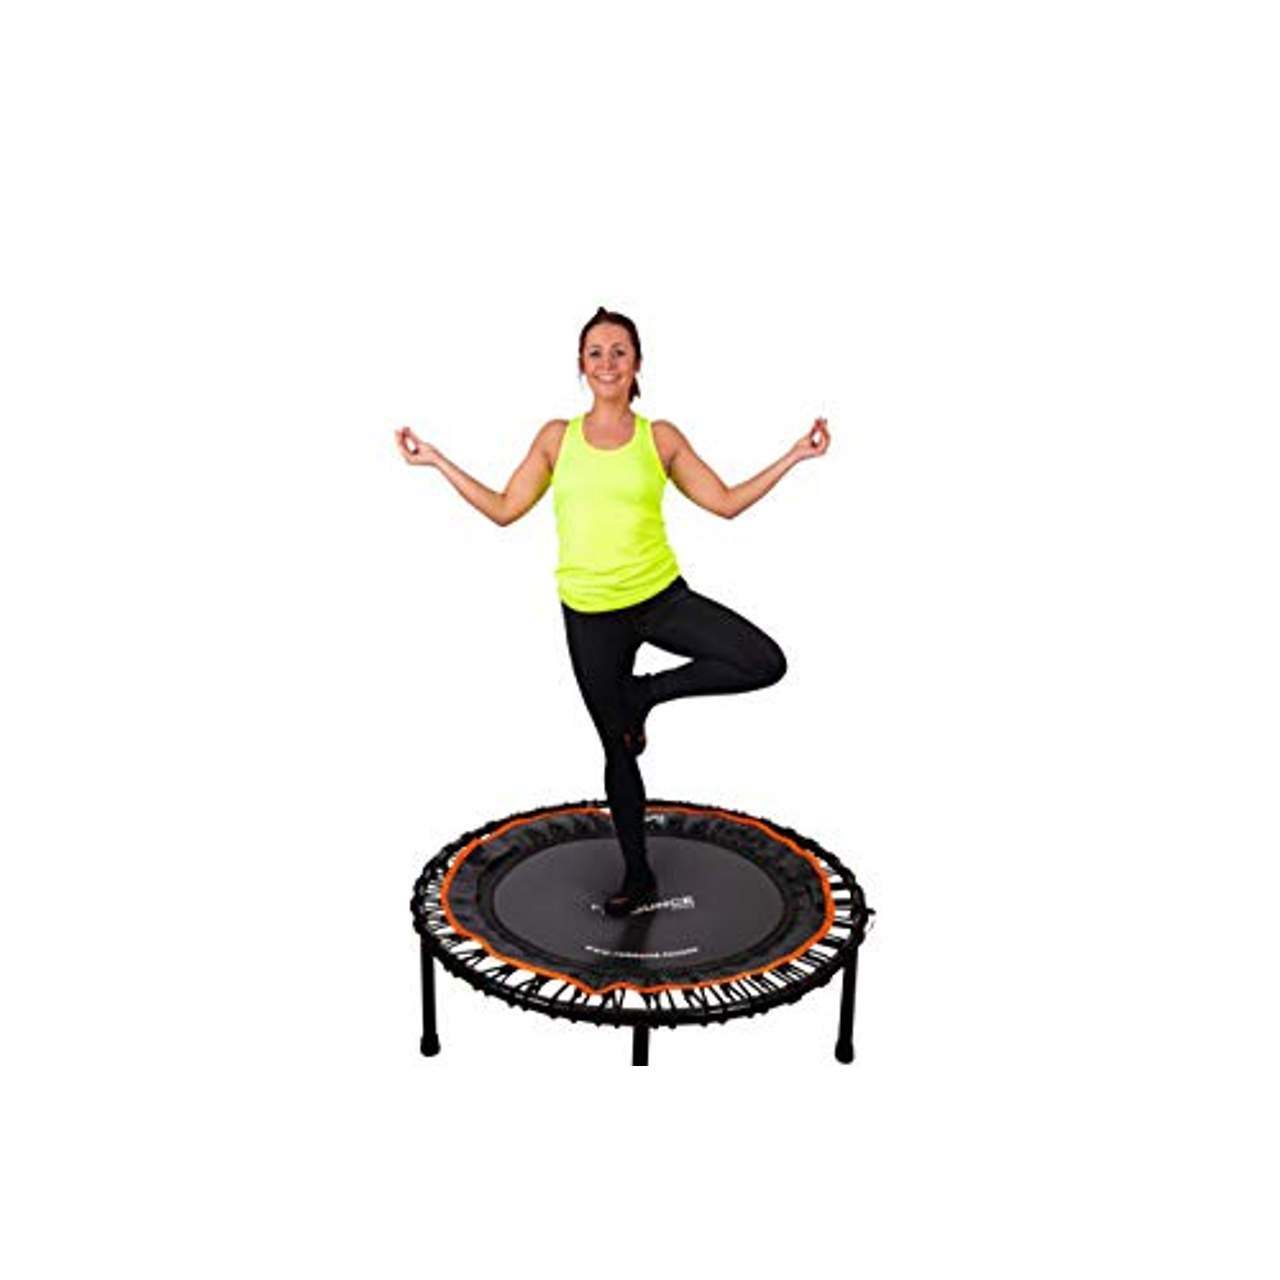 Best Urban Cardio Workout Home Trainer Lxn Black Silent Fitness Mini Trampoline with Adjustable Handrail Indoor for Adults Covered Bungee Rope System Max Limit 500 lbs 